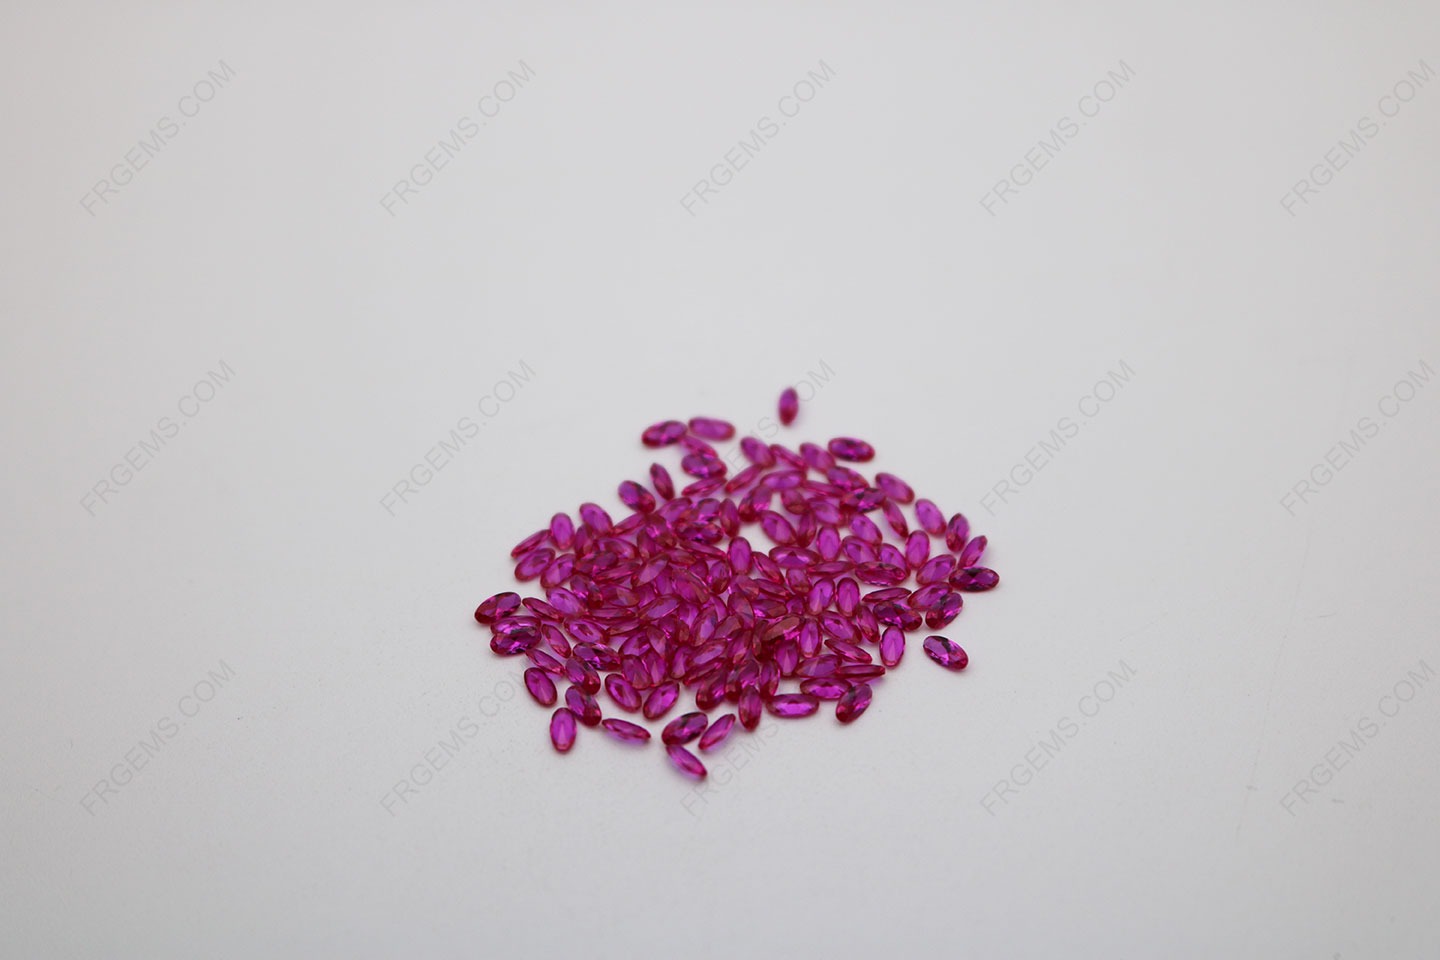 Loose Synthetic Lab Created Corundum Ruby Red 5# Oval Shape Faceted Cut 2x4mm gemstones IMG_1040